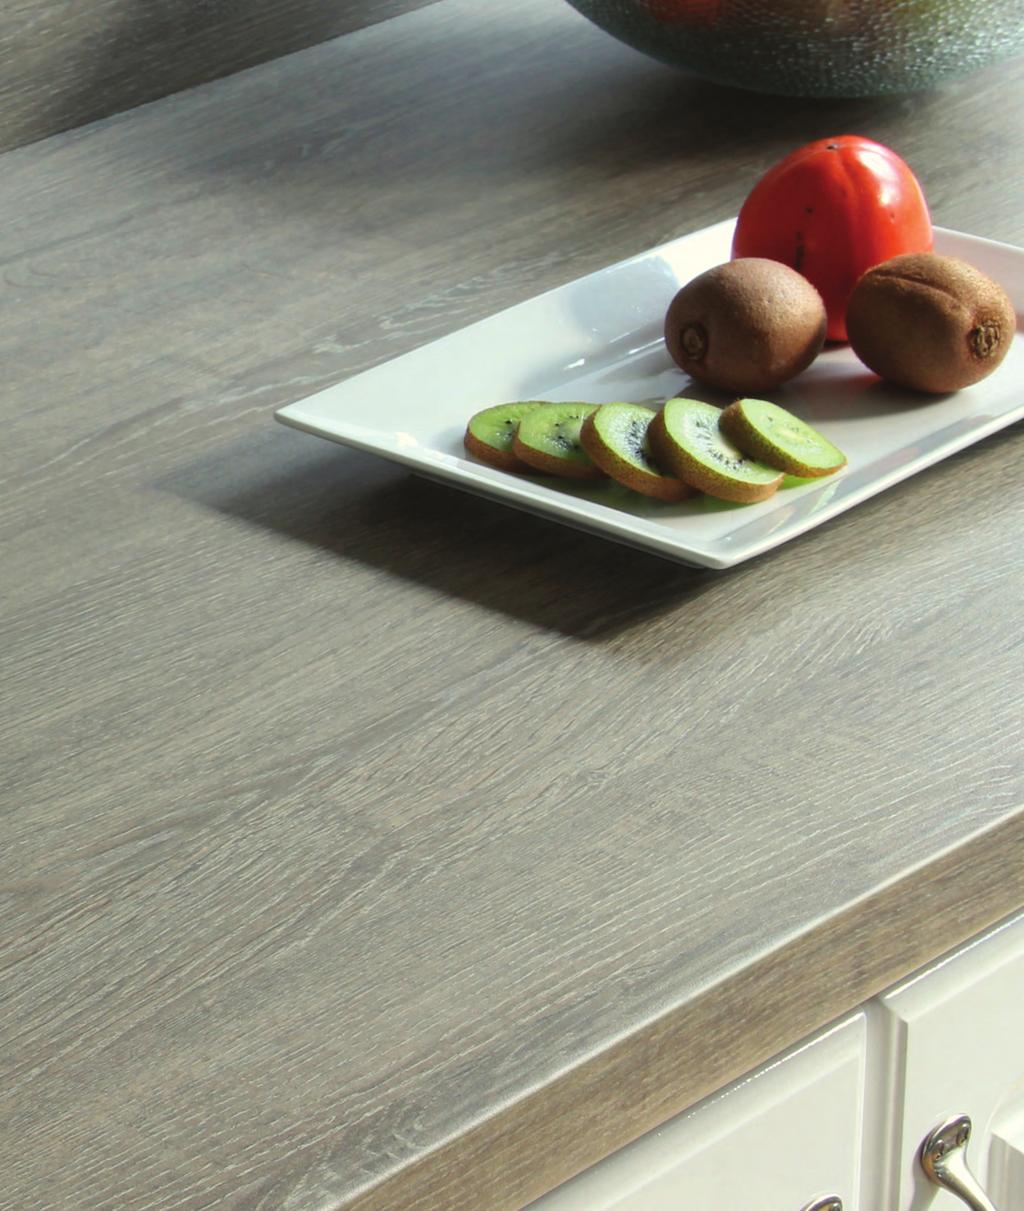 ORIGINAL SILKWOOD Partnered with Original s fabulous wood grain effects, Silkwood provides a natural, lightly